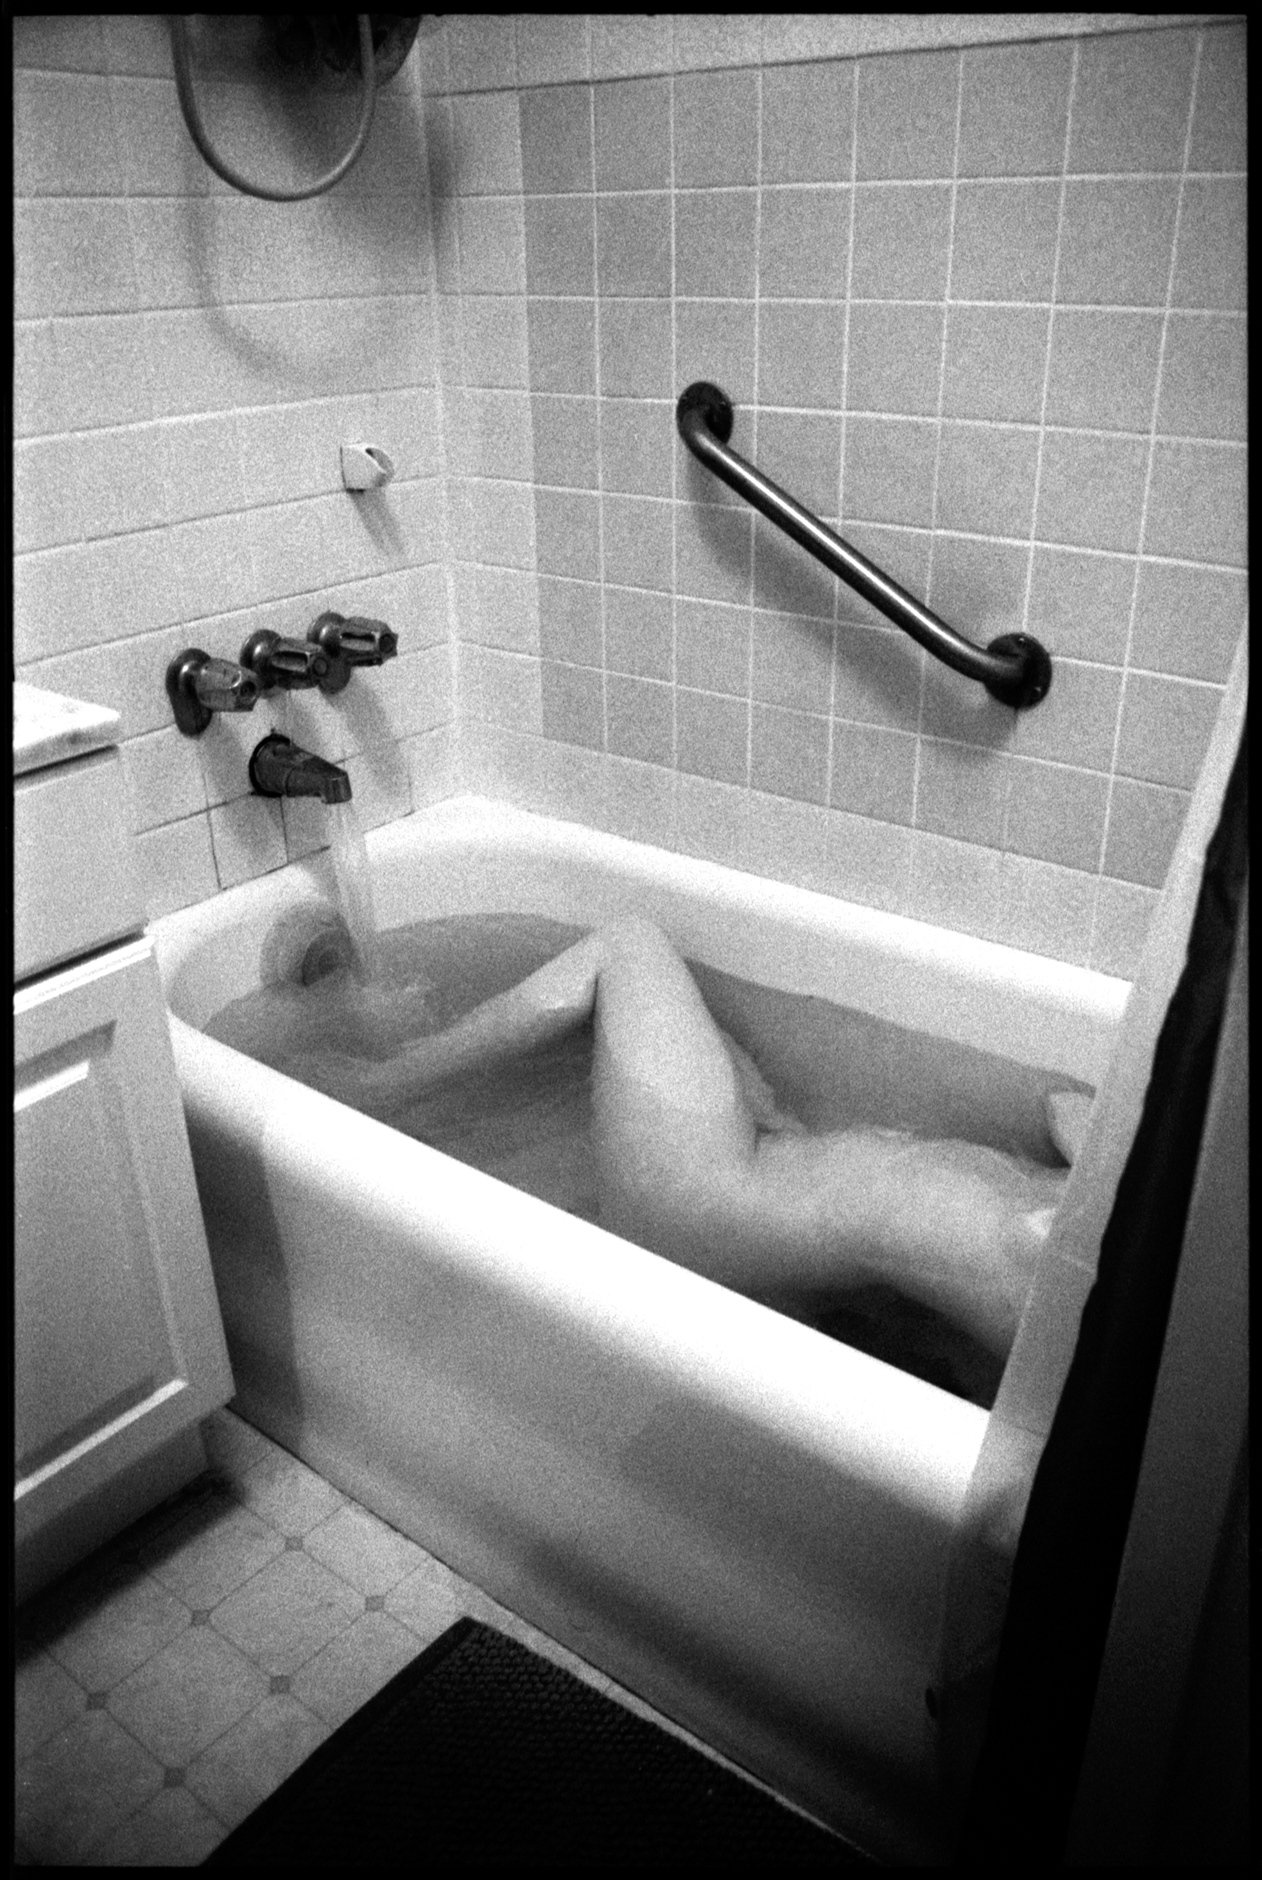  #0269_22 - Bath. San Francisco, California / 2013   Excerpts from the book  "Fragments"    Signed Copies   On Demand @Blurb   Online Shop  